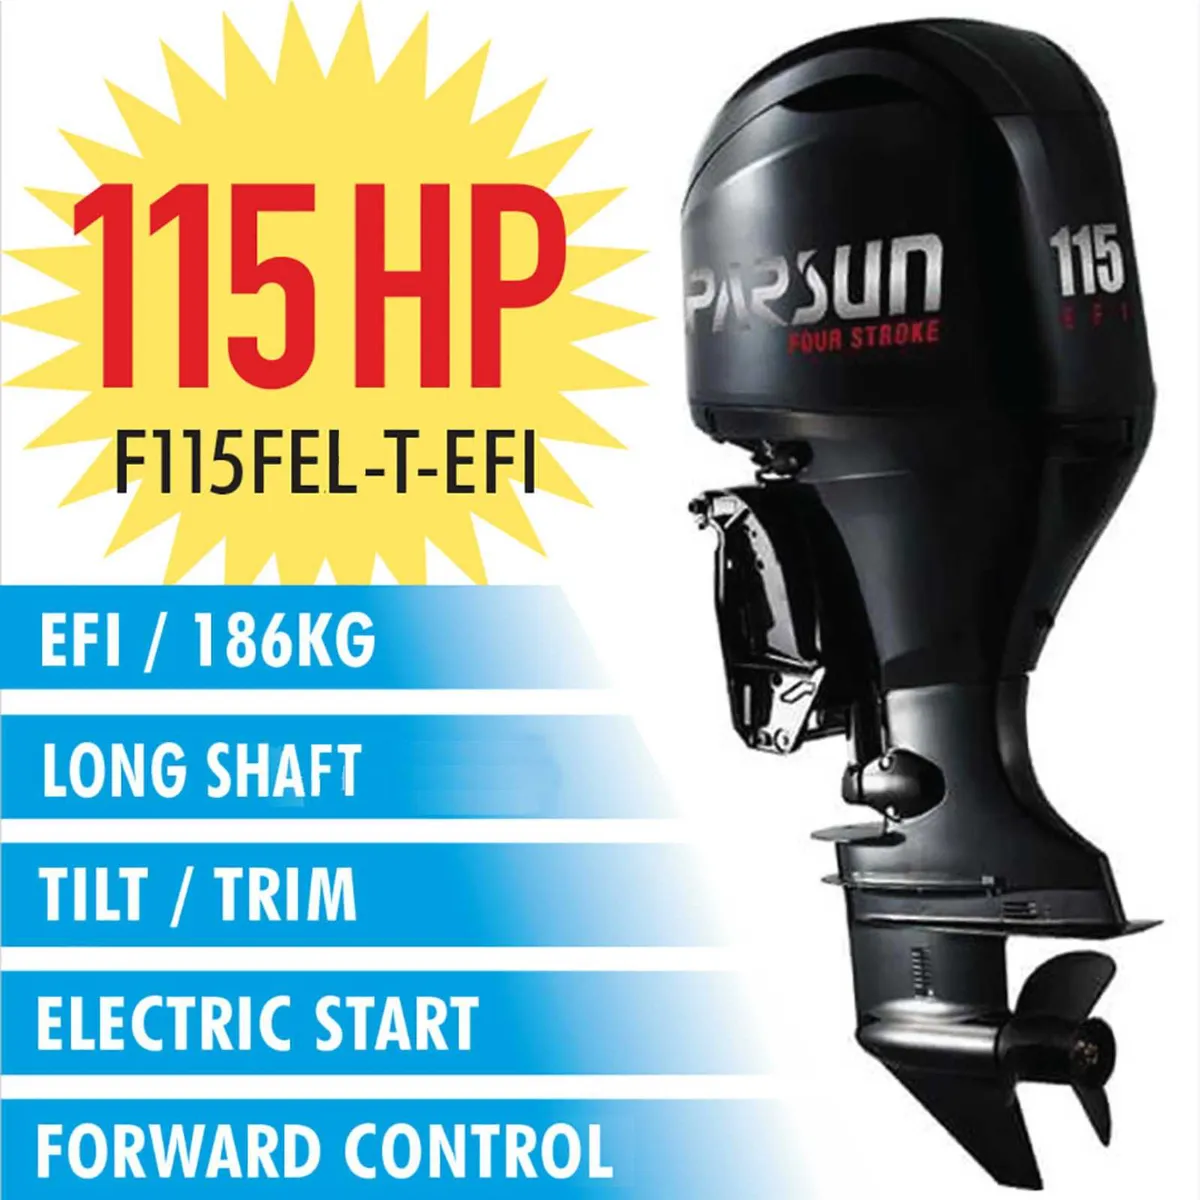 NEW PARSUN F115 HP  IN STOCK NOW